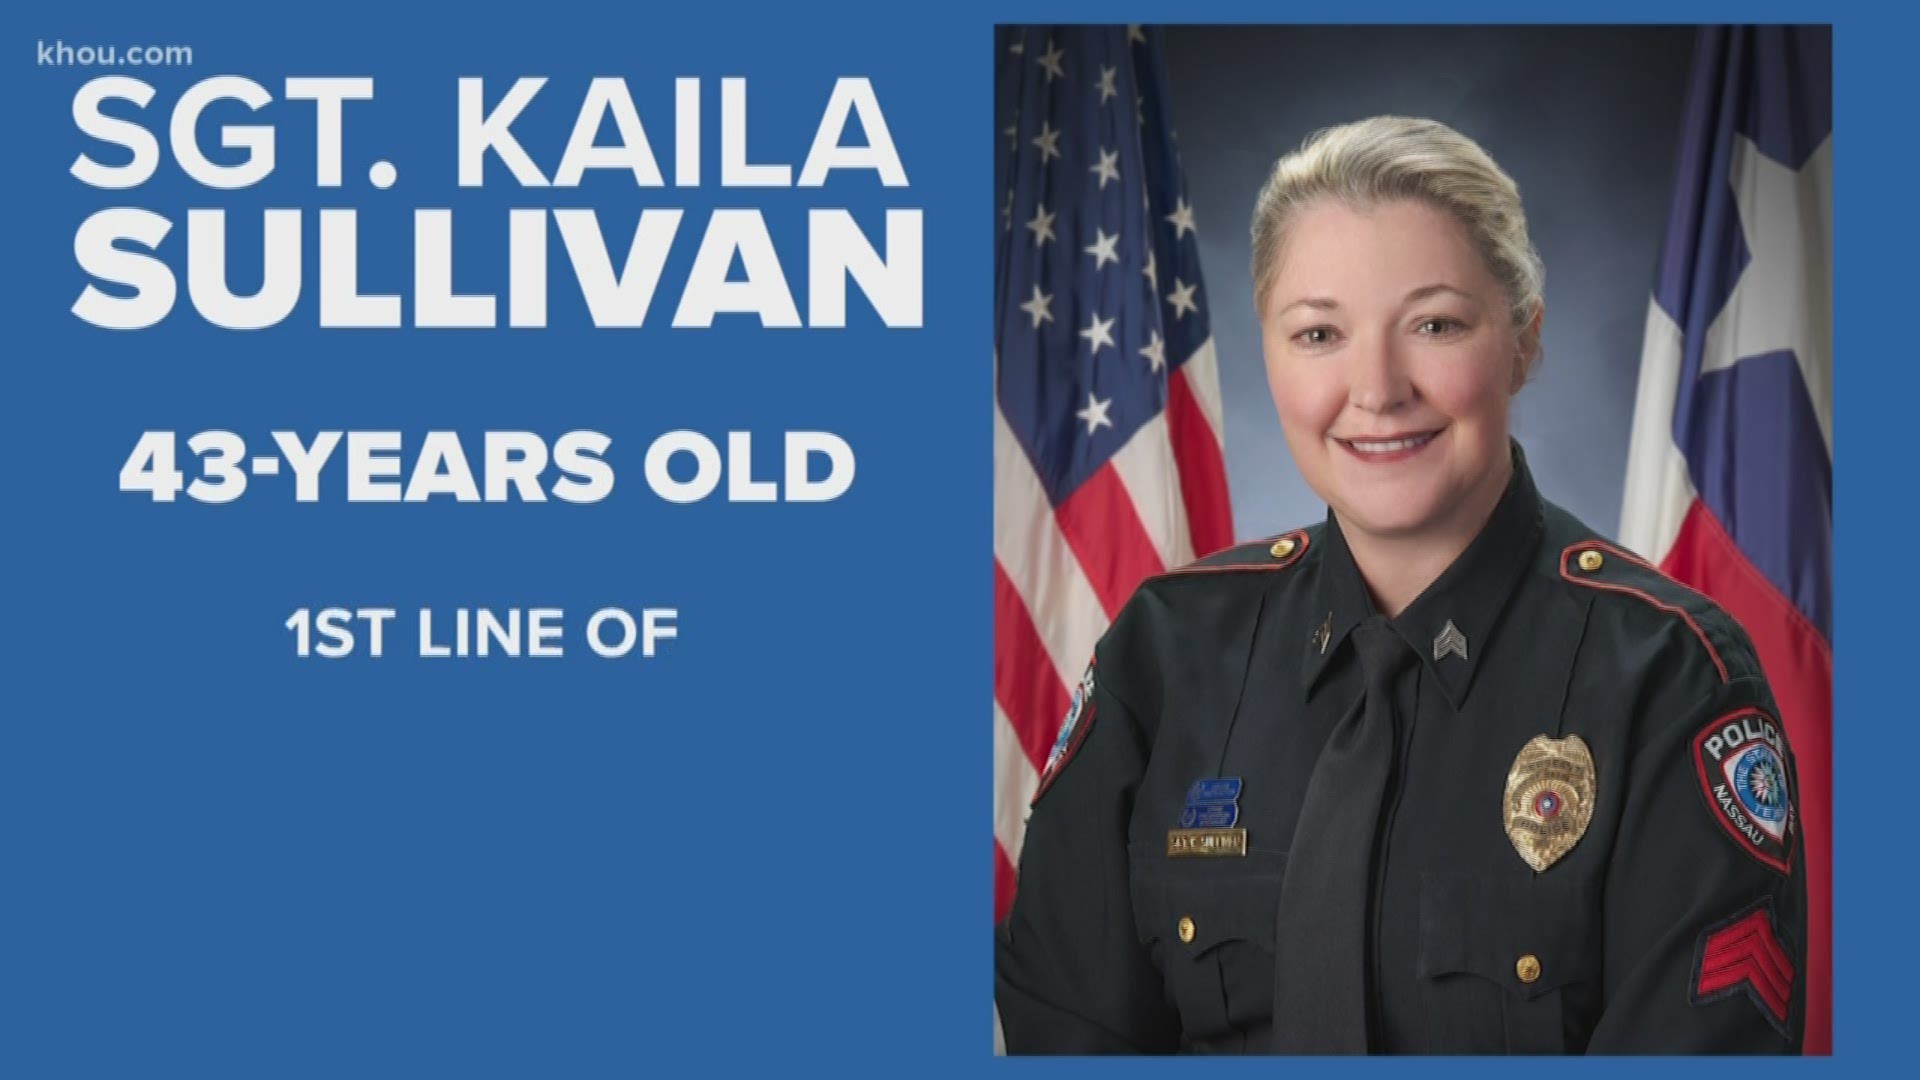 From the time Sgt. Kaila Sullivan was killed to the arrest of the suspect in hear death, here is a timeline of events.